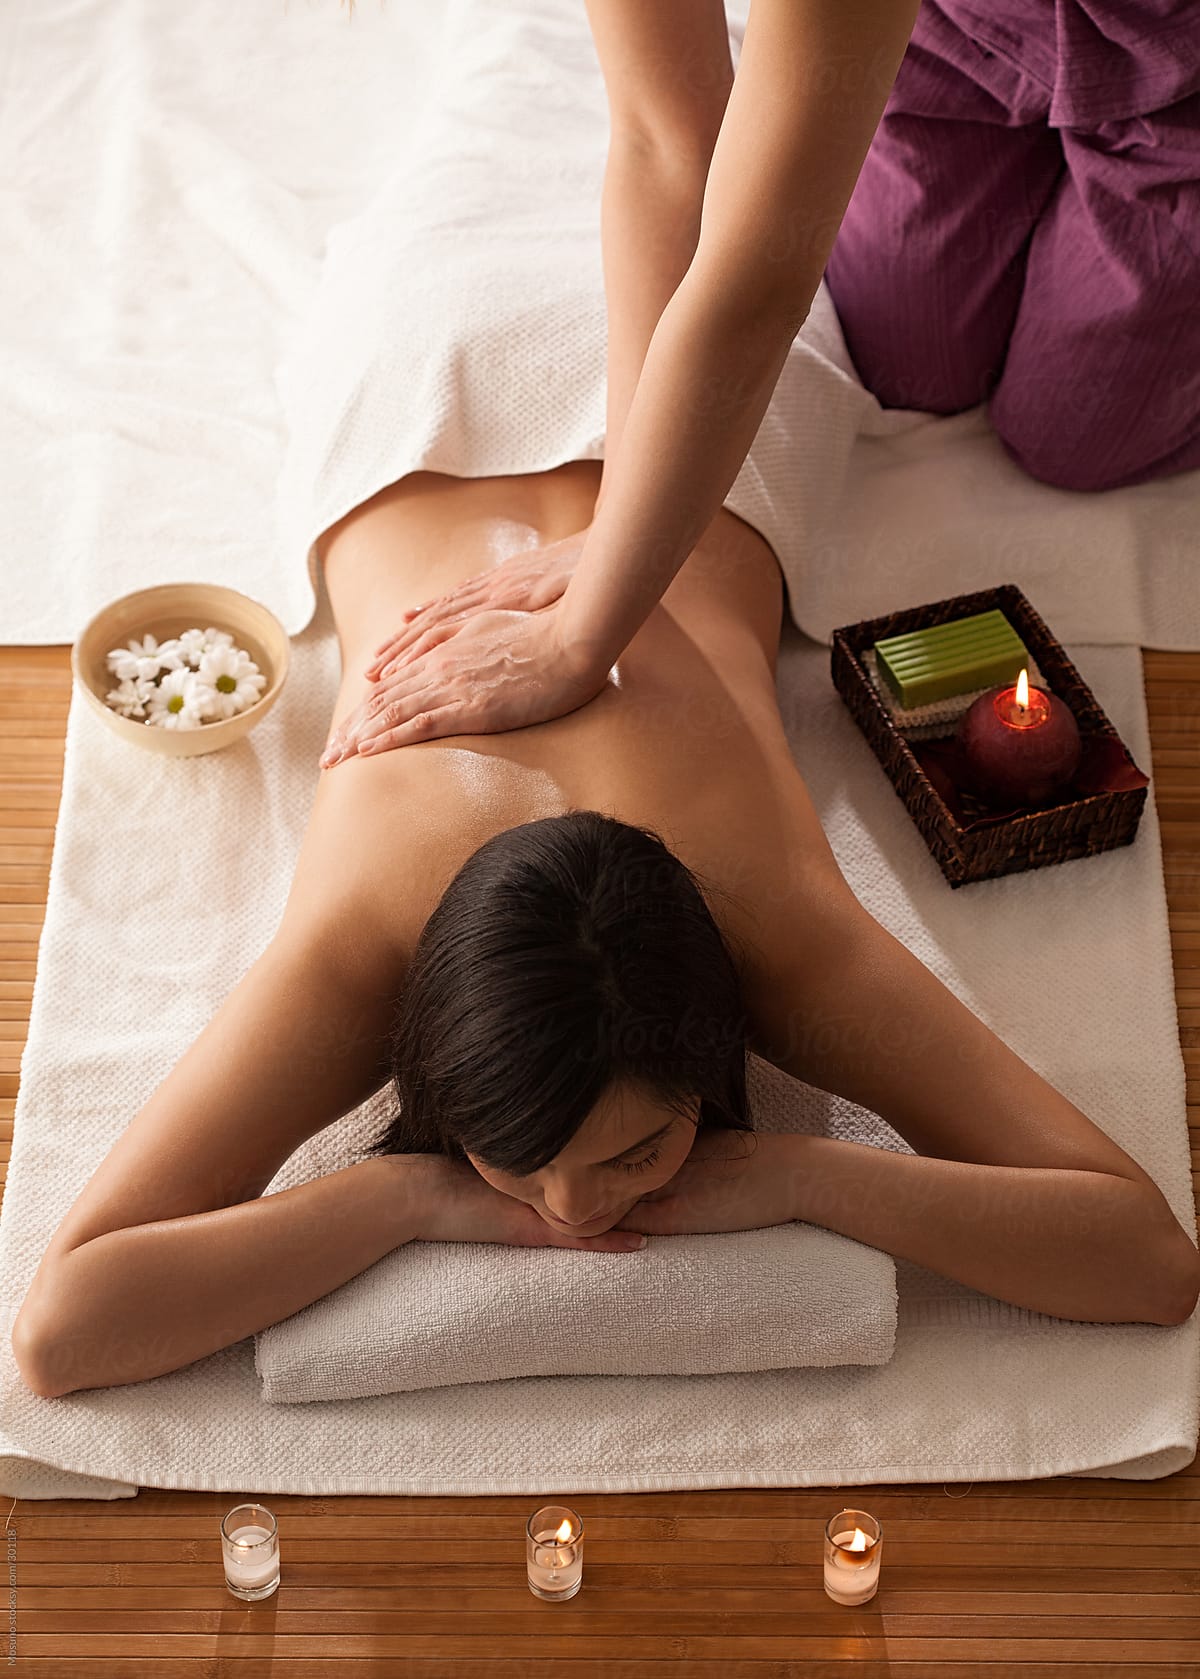 Woman Enjoying Massage In Spa Center By Stocksy Contributor Mosuno